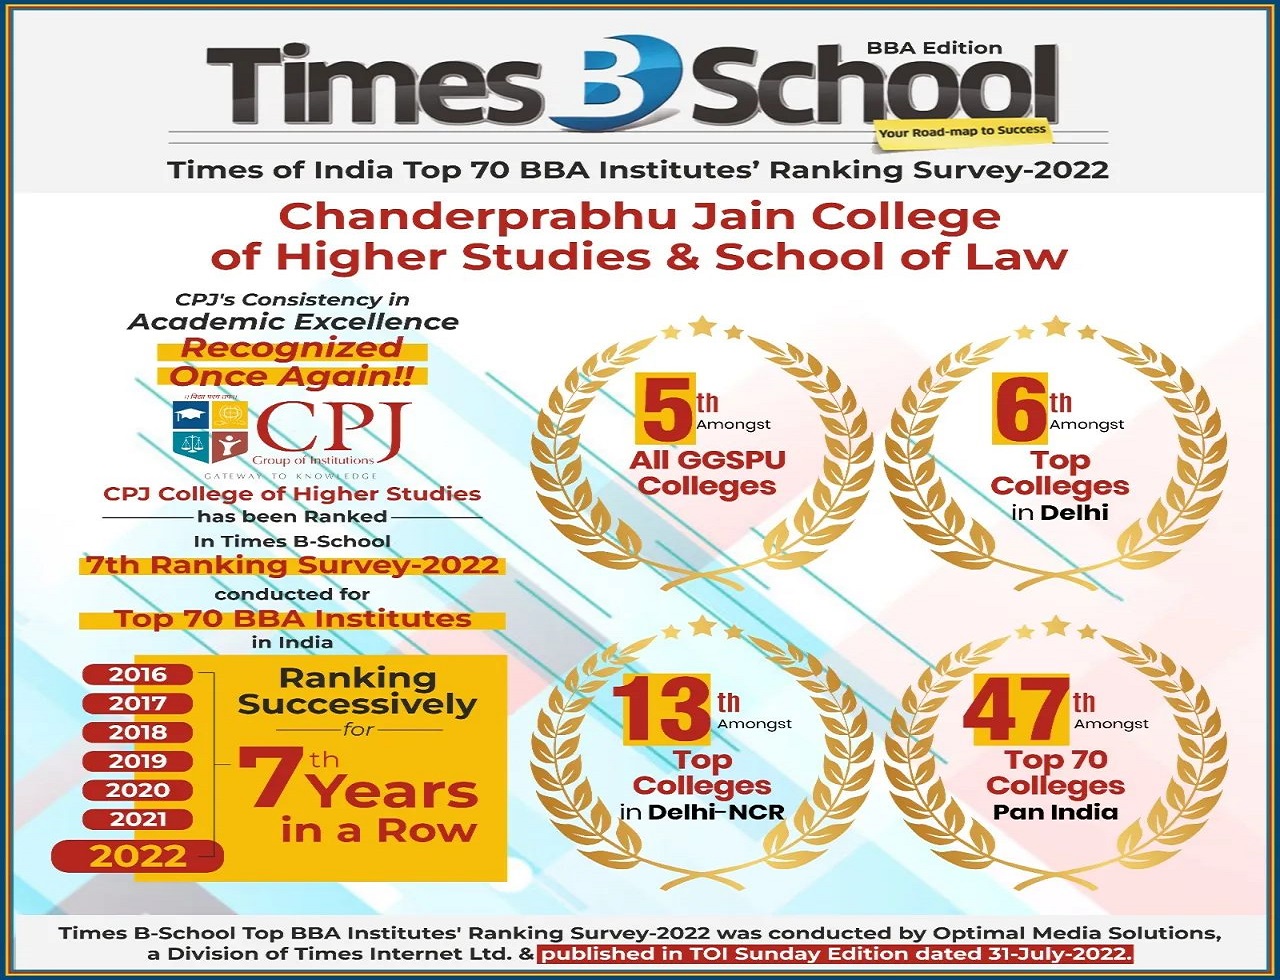 Times B-School conducted for Top 70 BBA Institutes in India